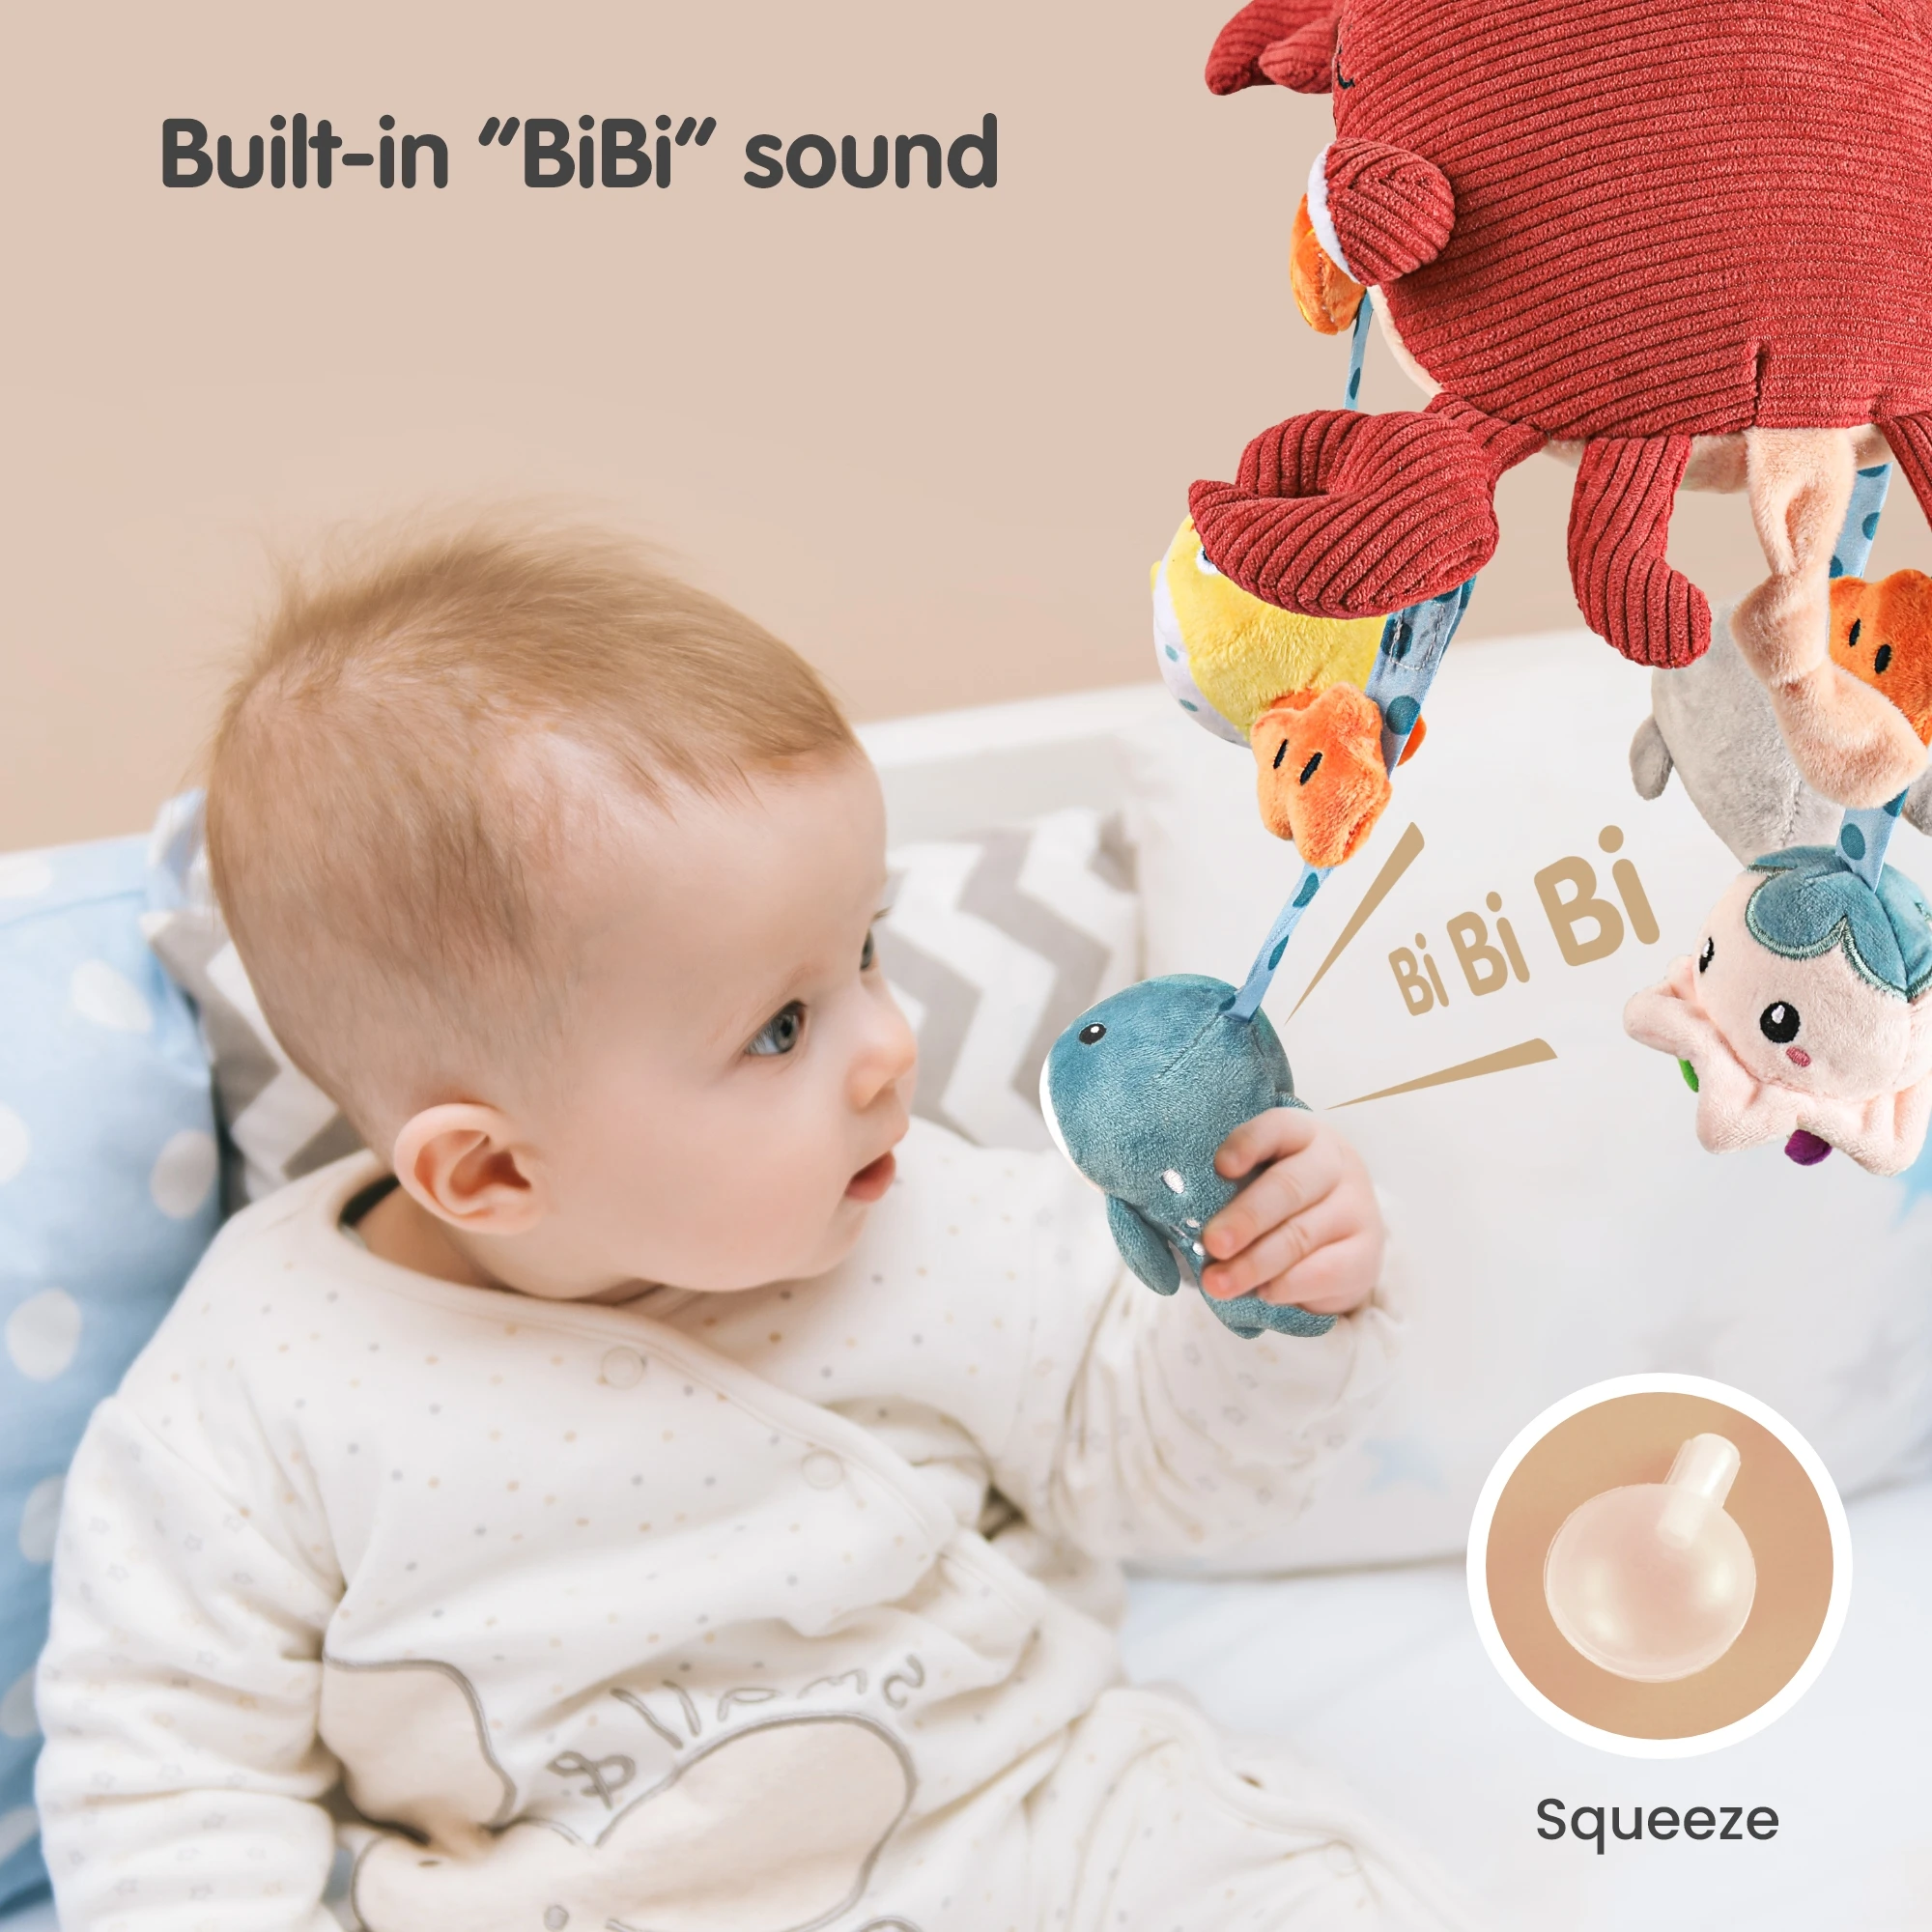 Tumama Kids New Design Animal Baby Toy Crab Mobile Crib Baby Stroller Lathe Hanging Bell Appease Rattle Plush Children's Toys